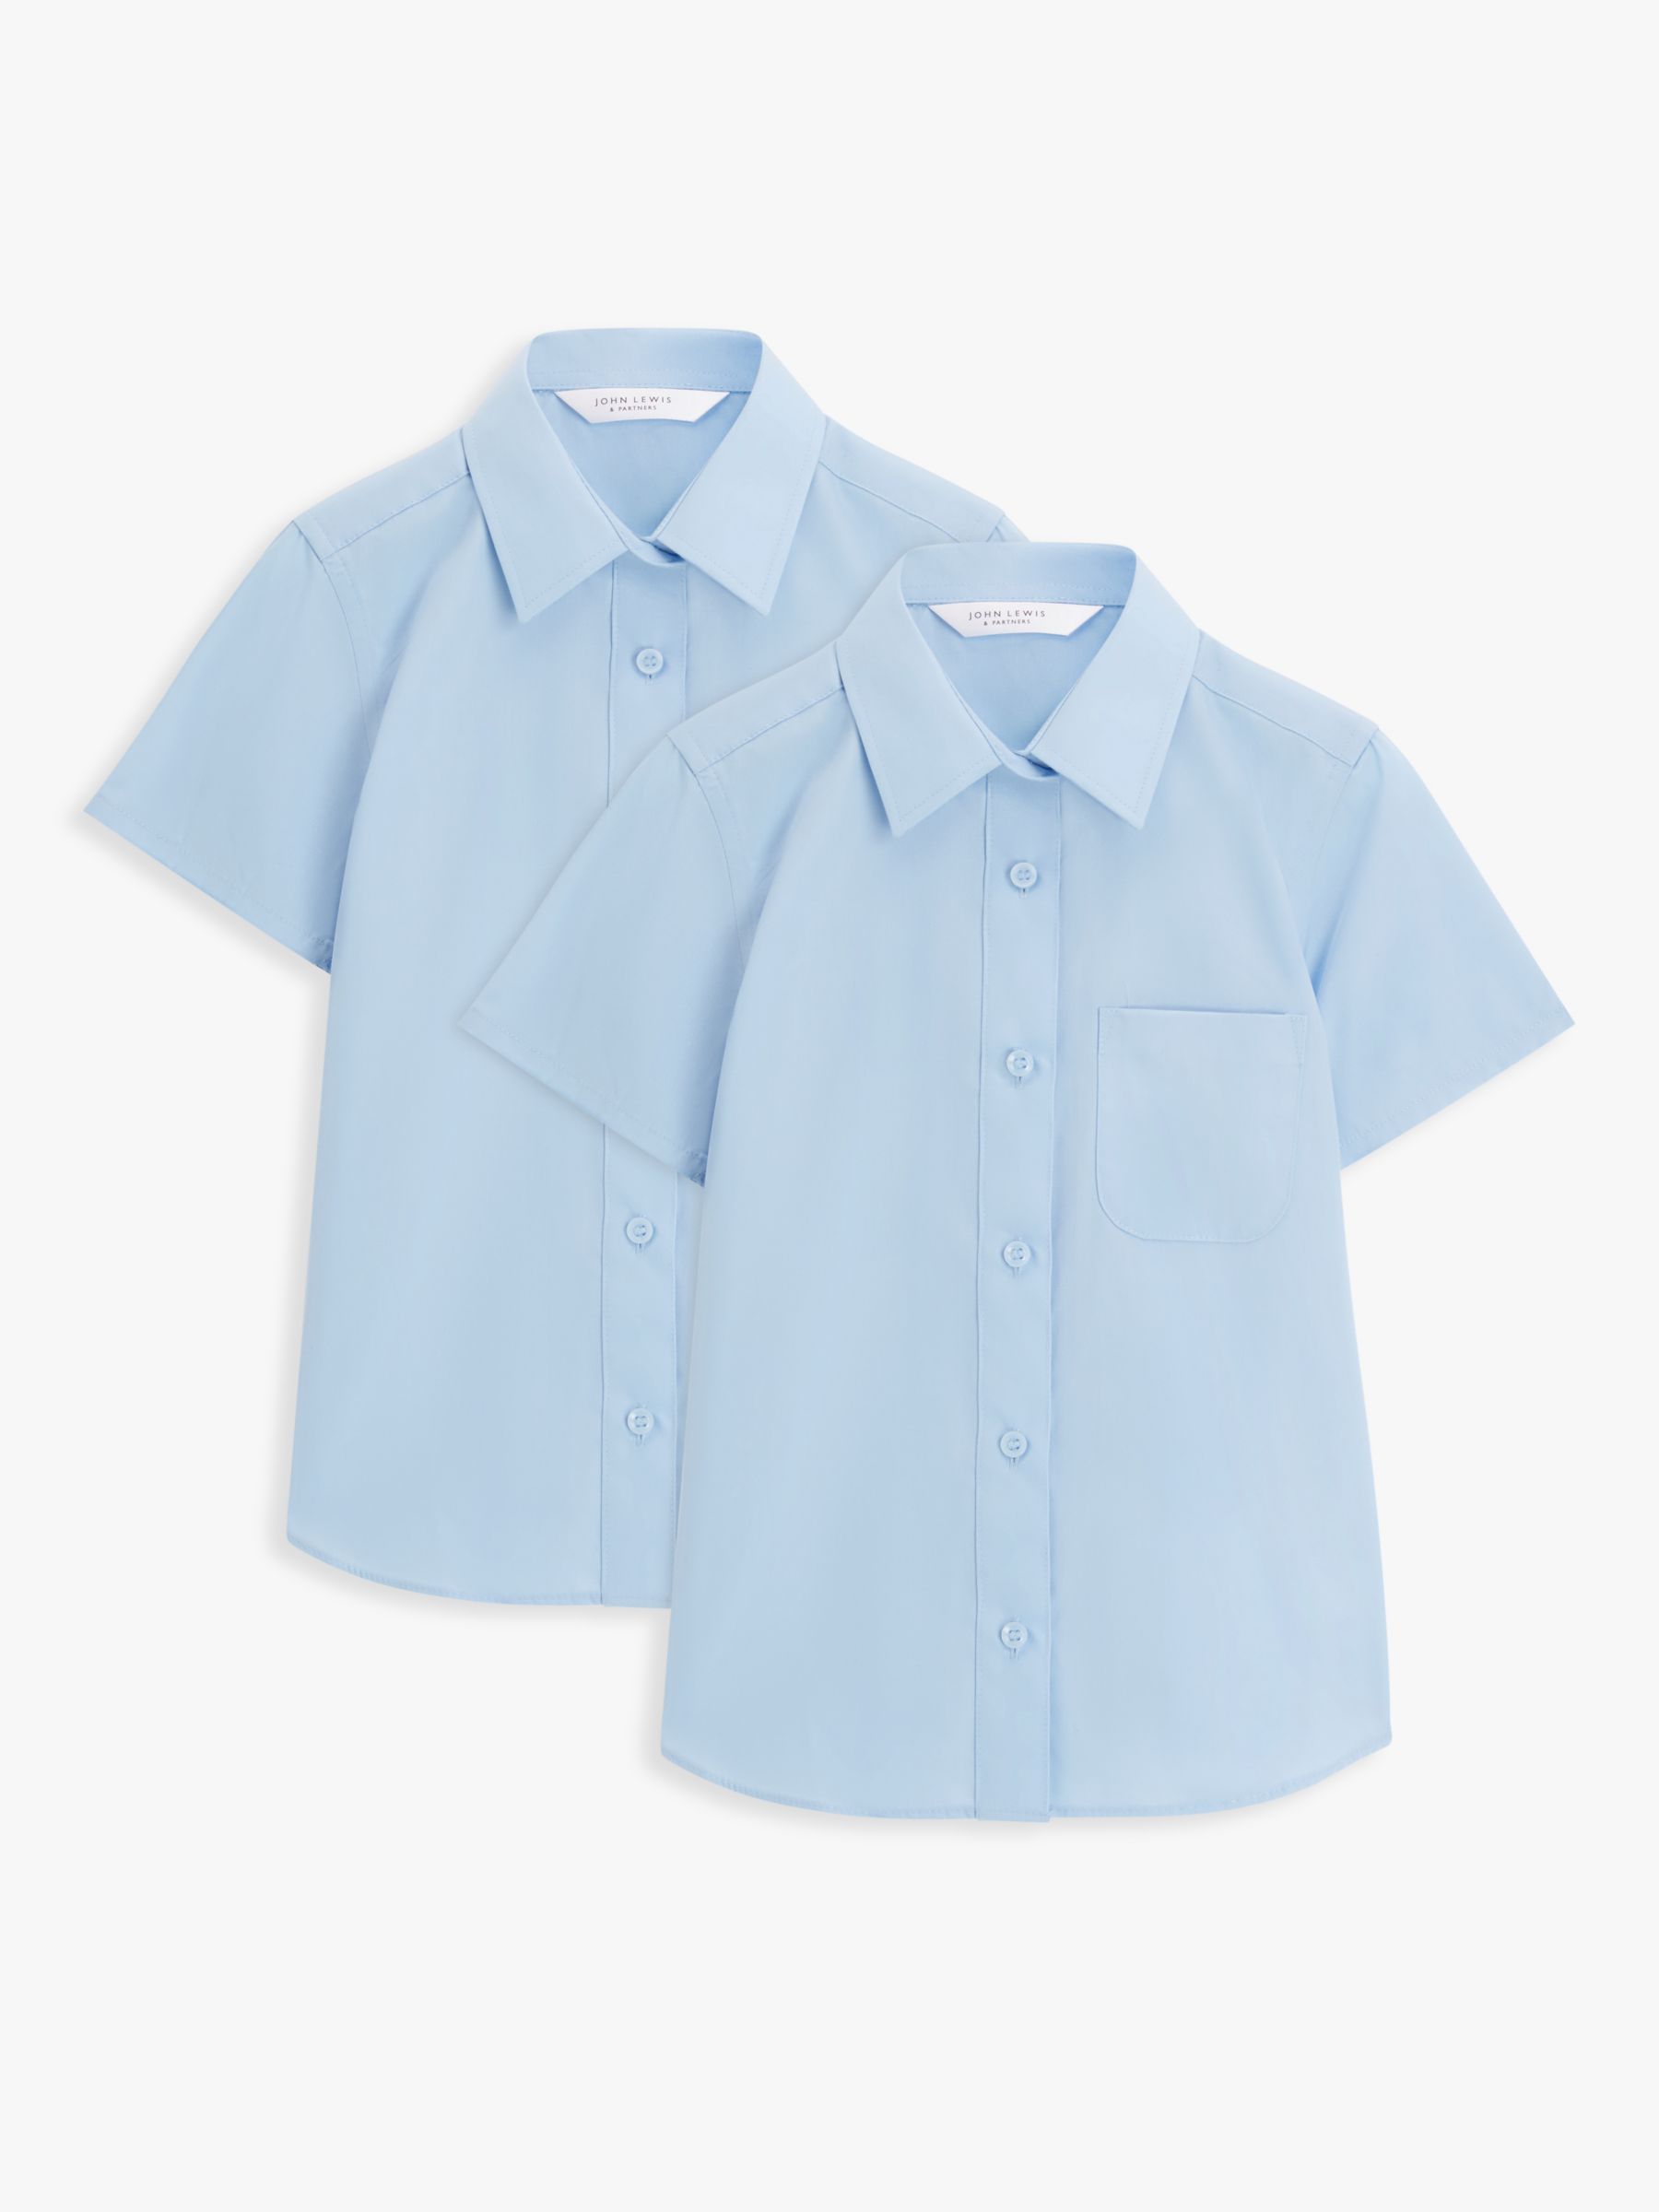 John Lewis Girls' Short Sleeved Stain Resistant Easy Care Blouse, Pack of 2, Blue, 4 years